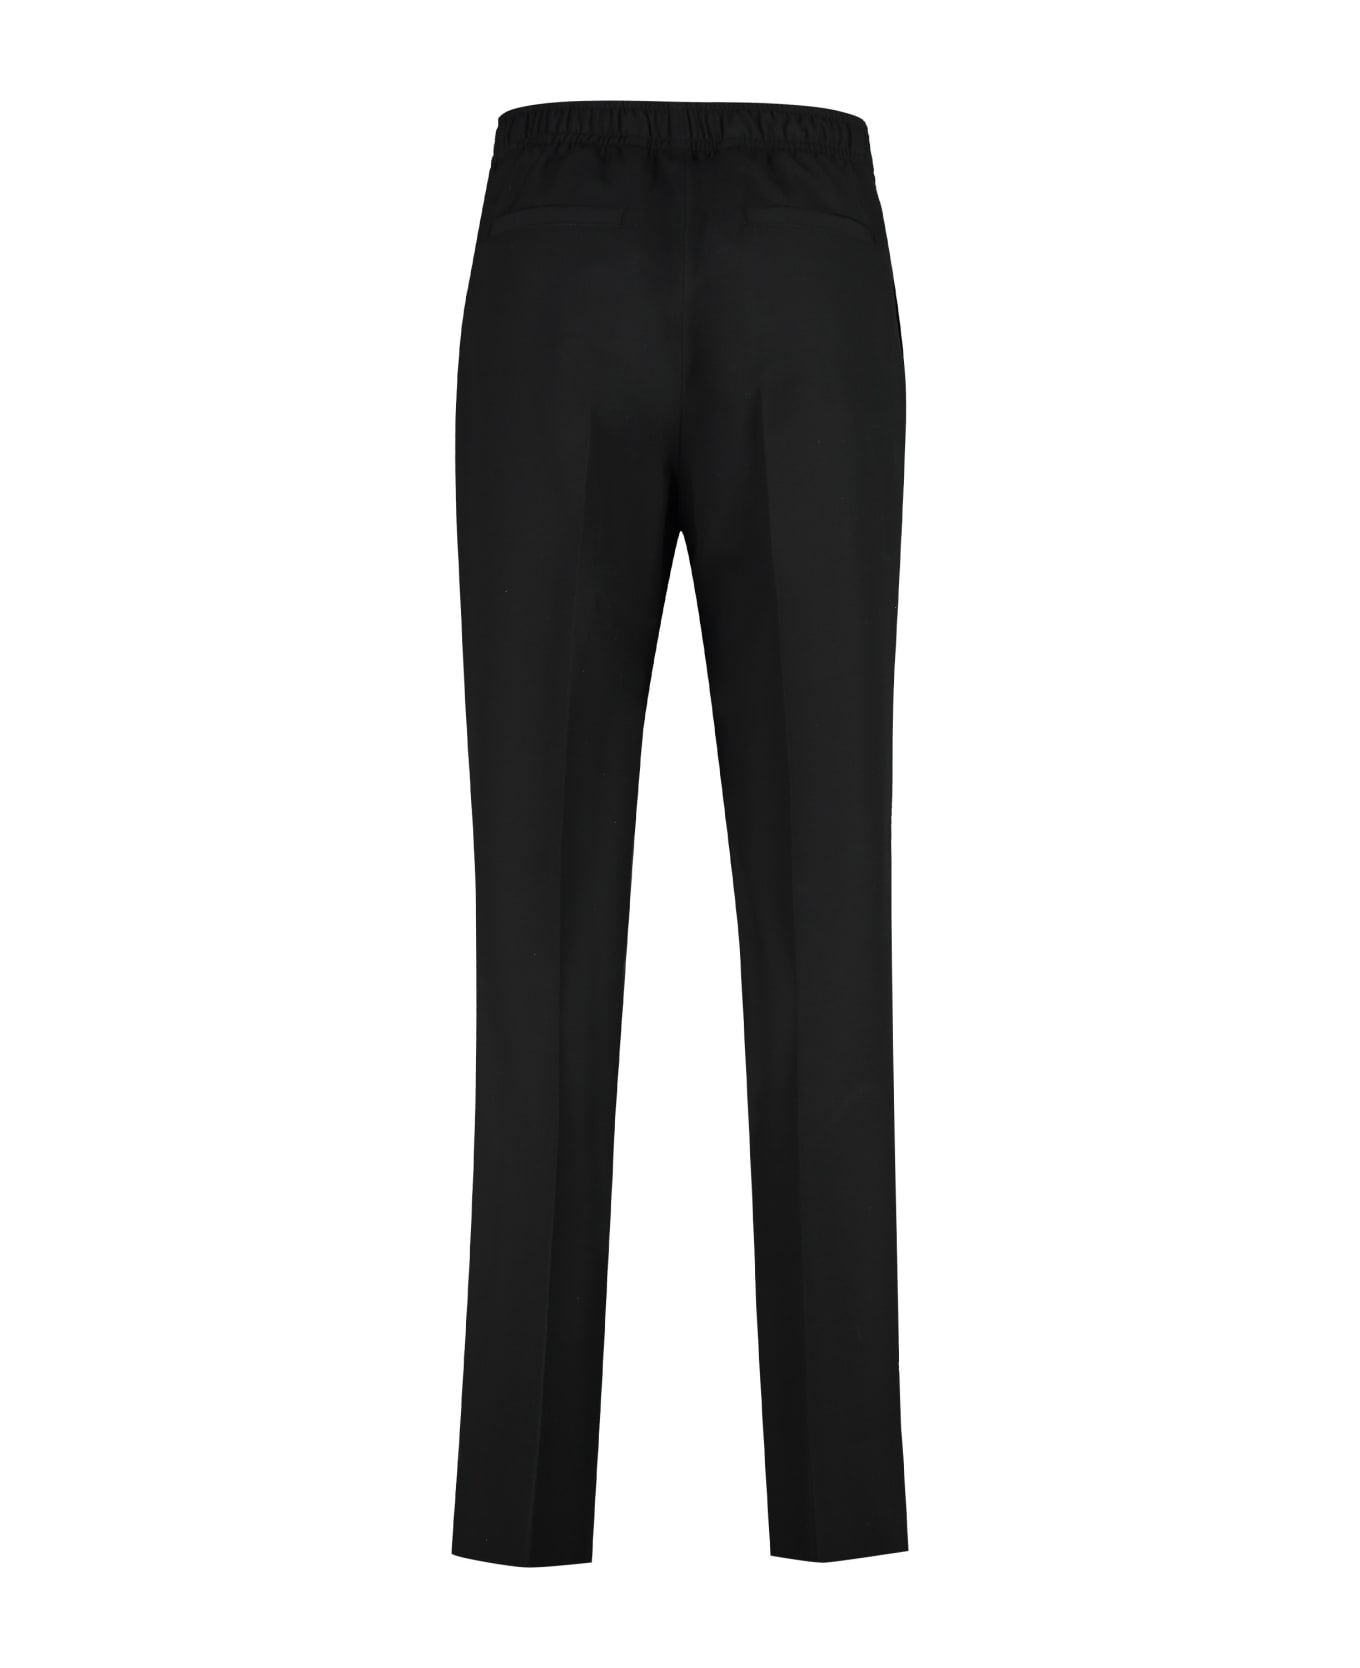 Givenchy Virgin Wool Trousers - BLACK ボトムス